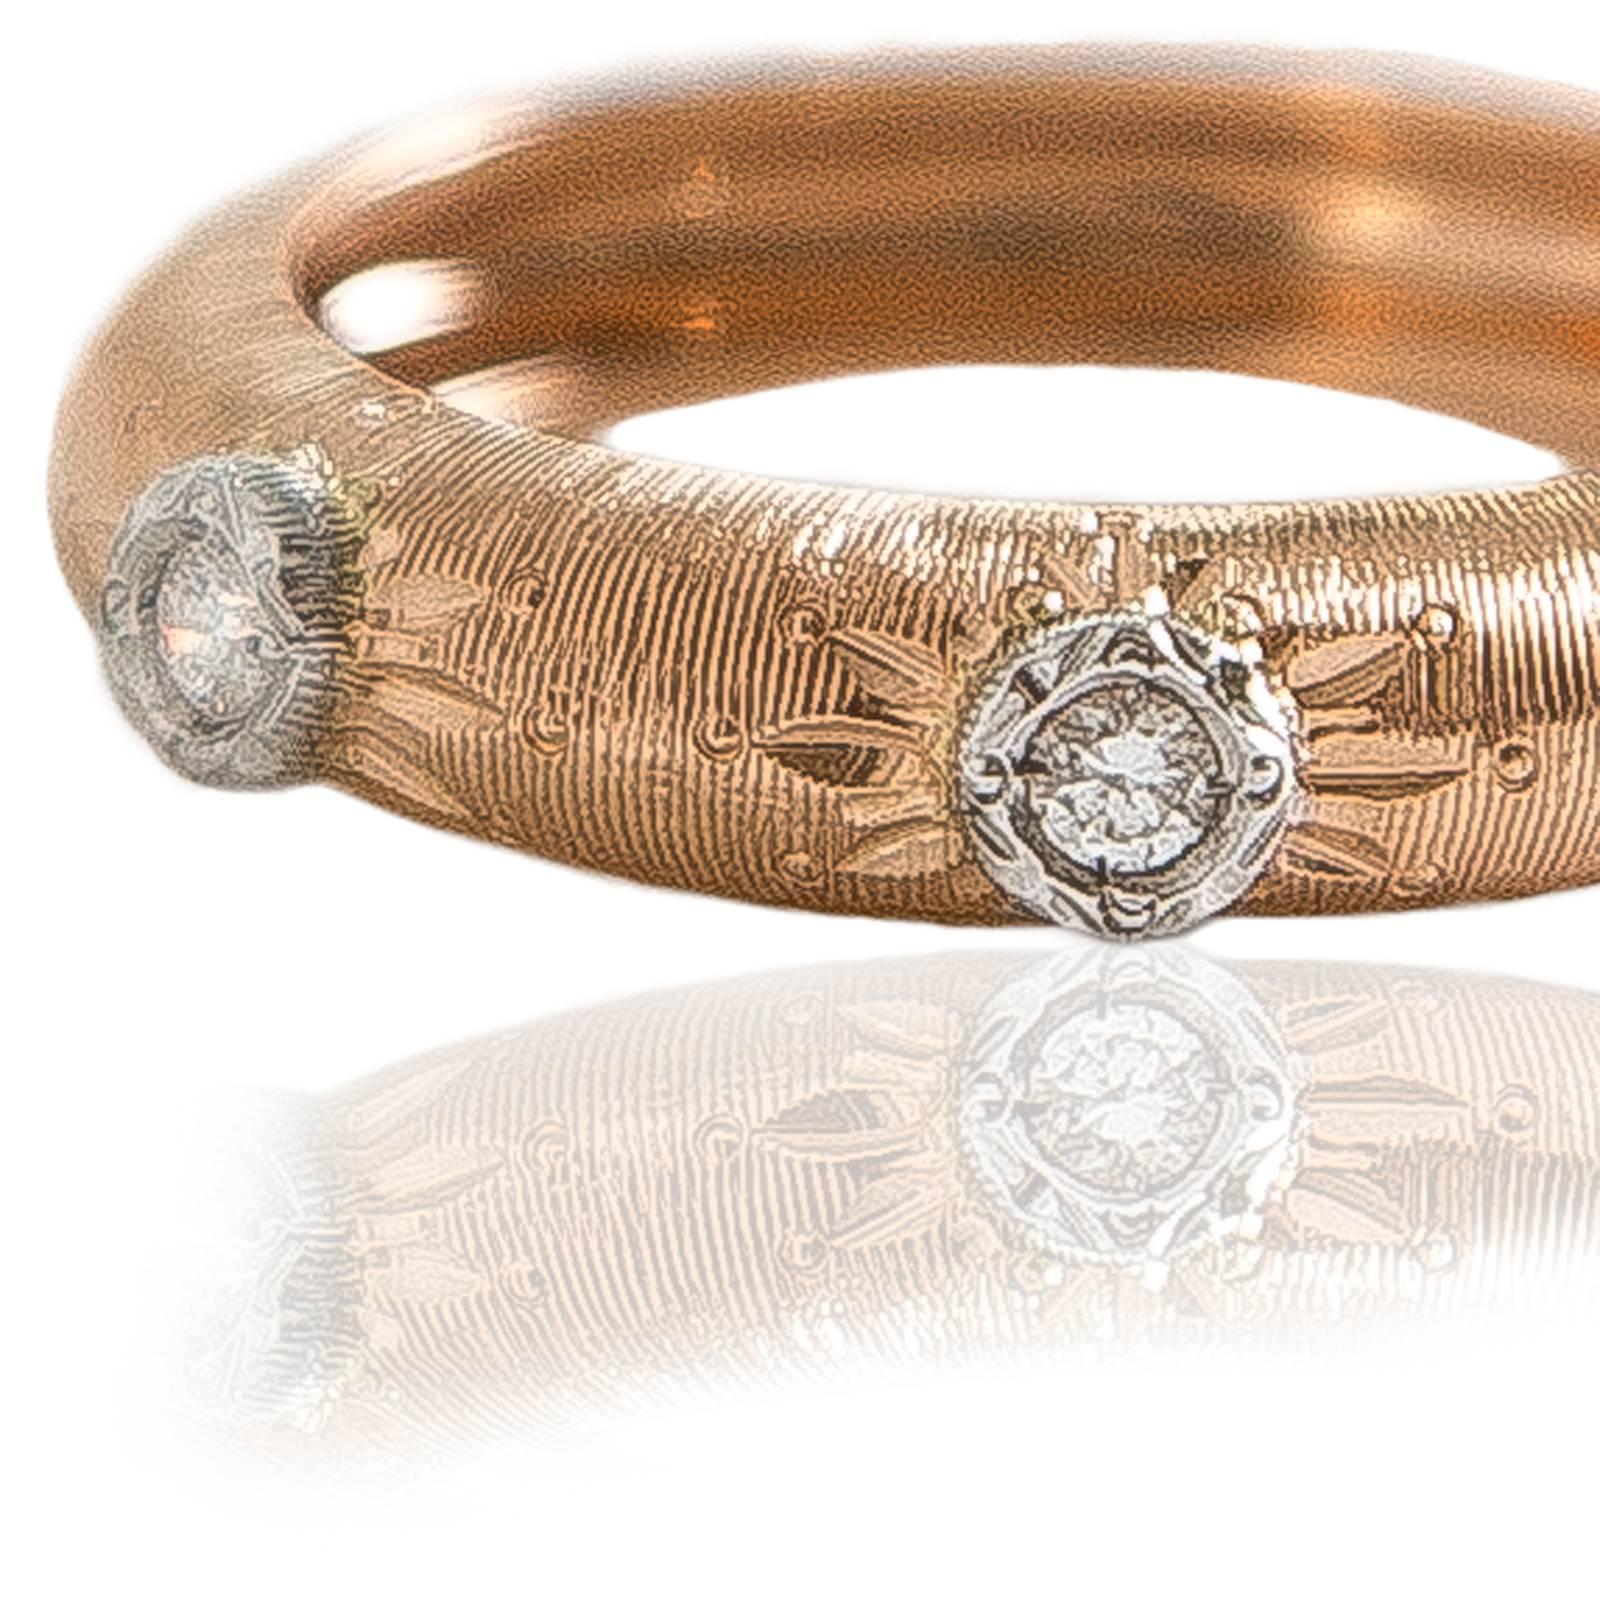 18kt. Rose gold ring with white diamonds 0,27 ct.

Handmade in Italy

Made-to-order production time: 5 weeks approx.
